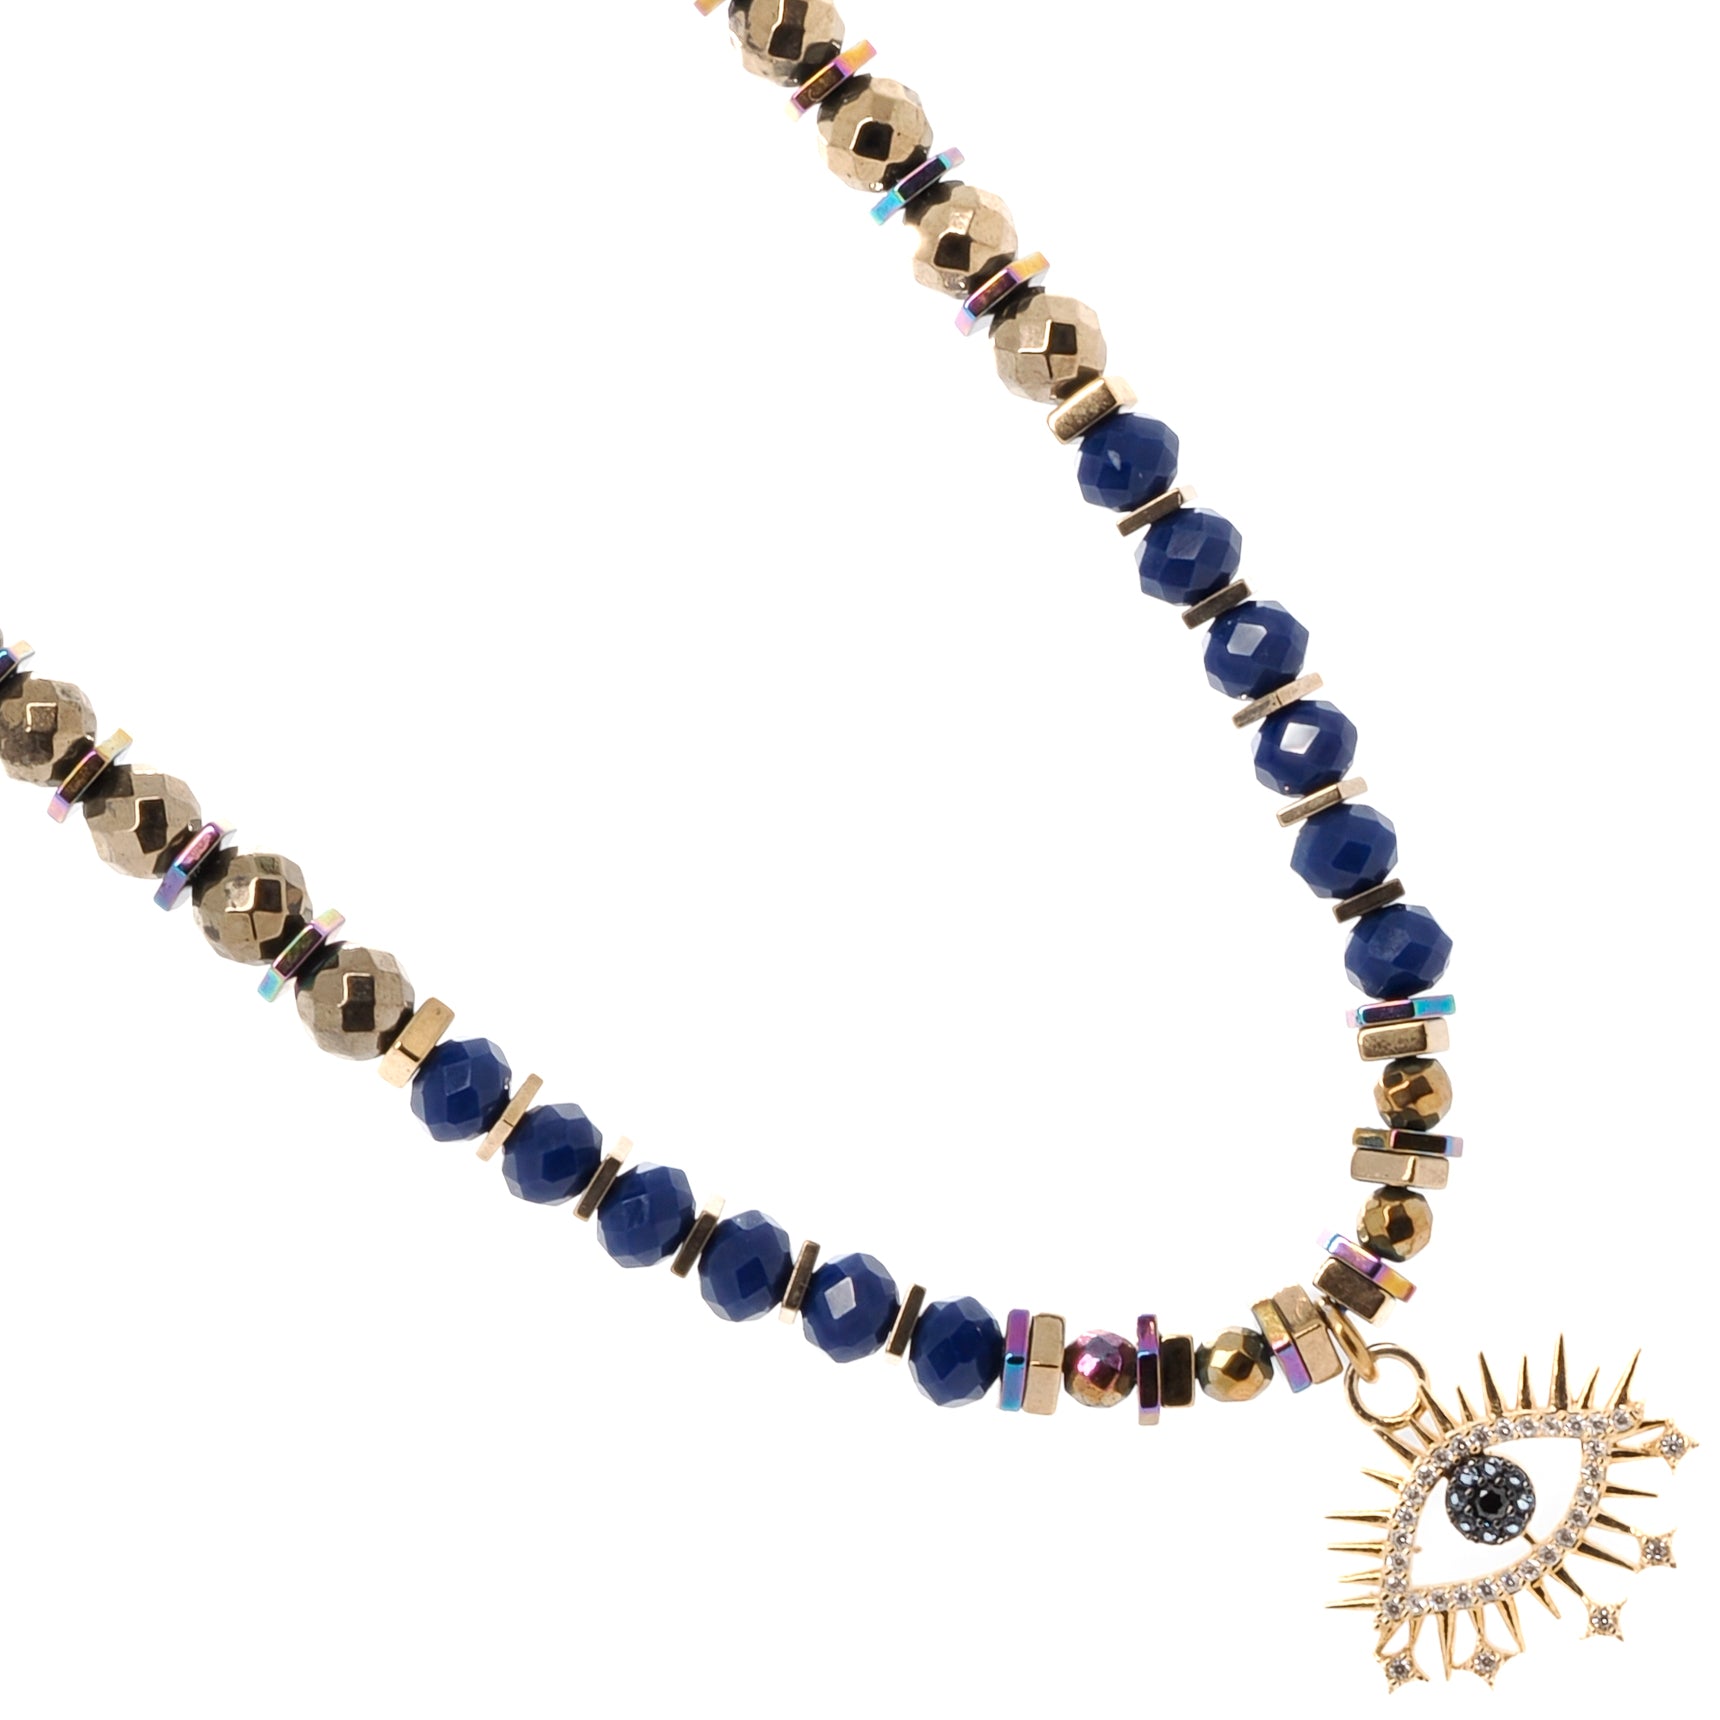 Blue Eye Necklace with Multicolor Hematite Spacers for Positive Energy